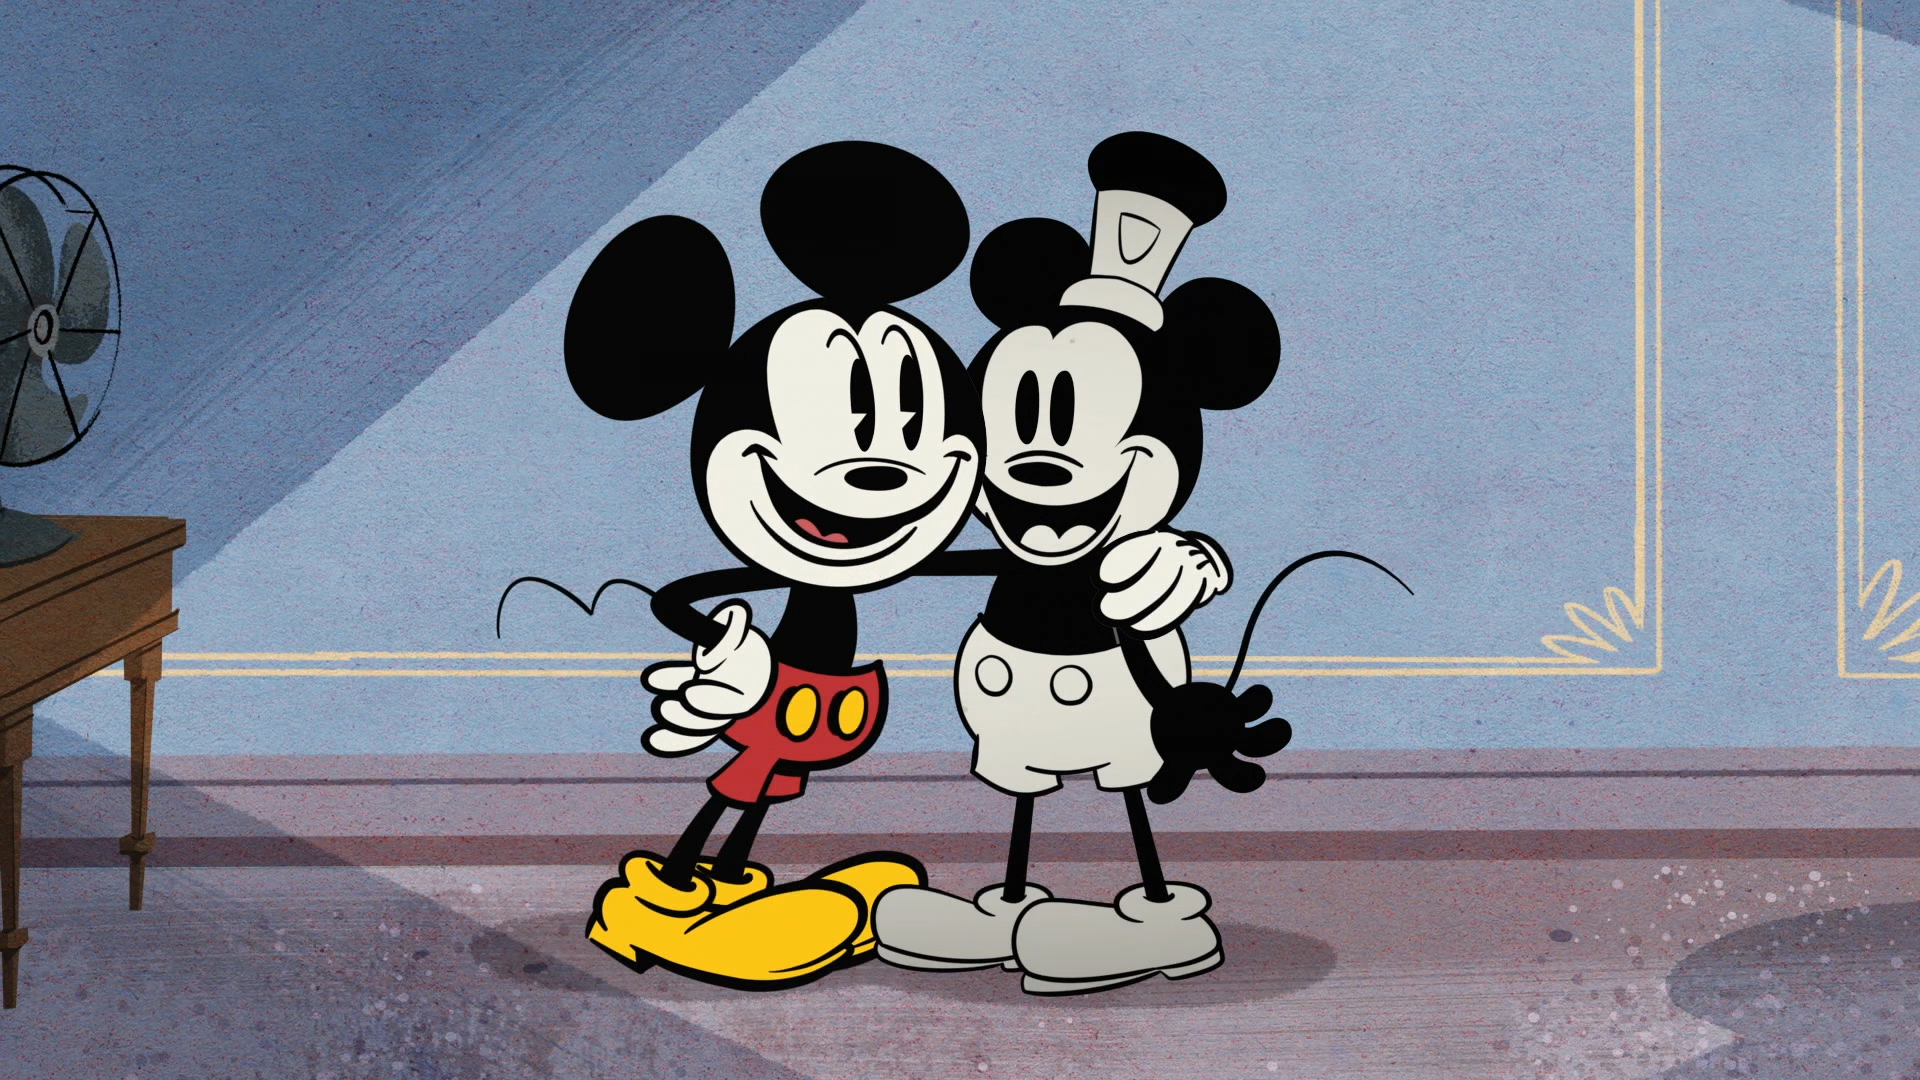 The Wonderful World of Mickey Mouse' Concludes by Returning to